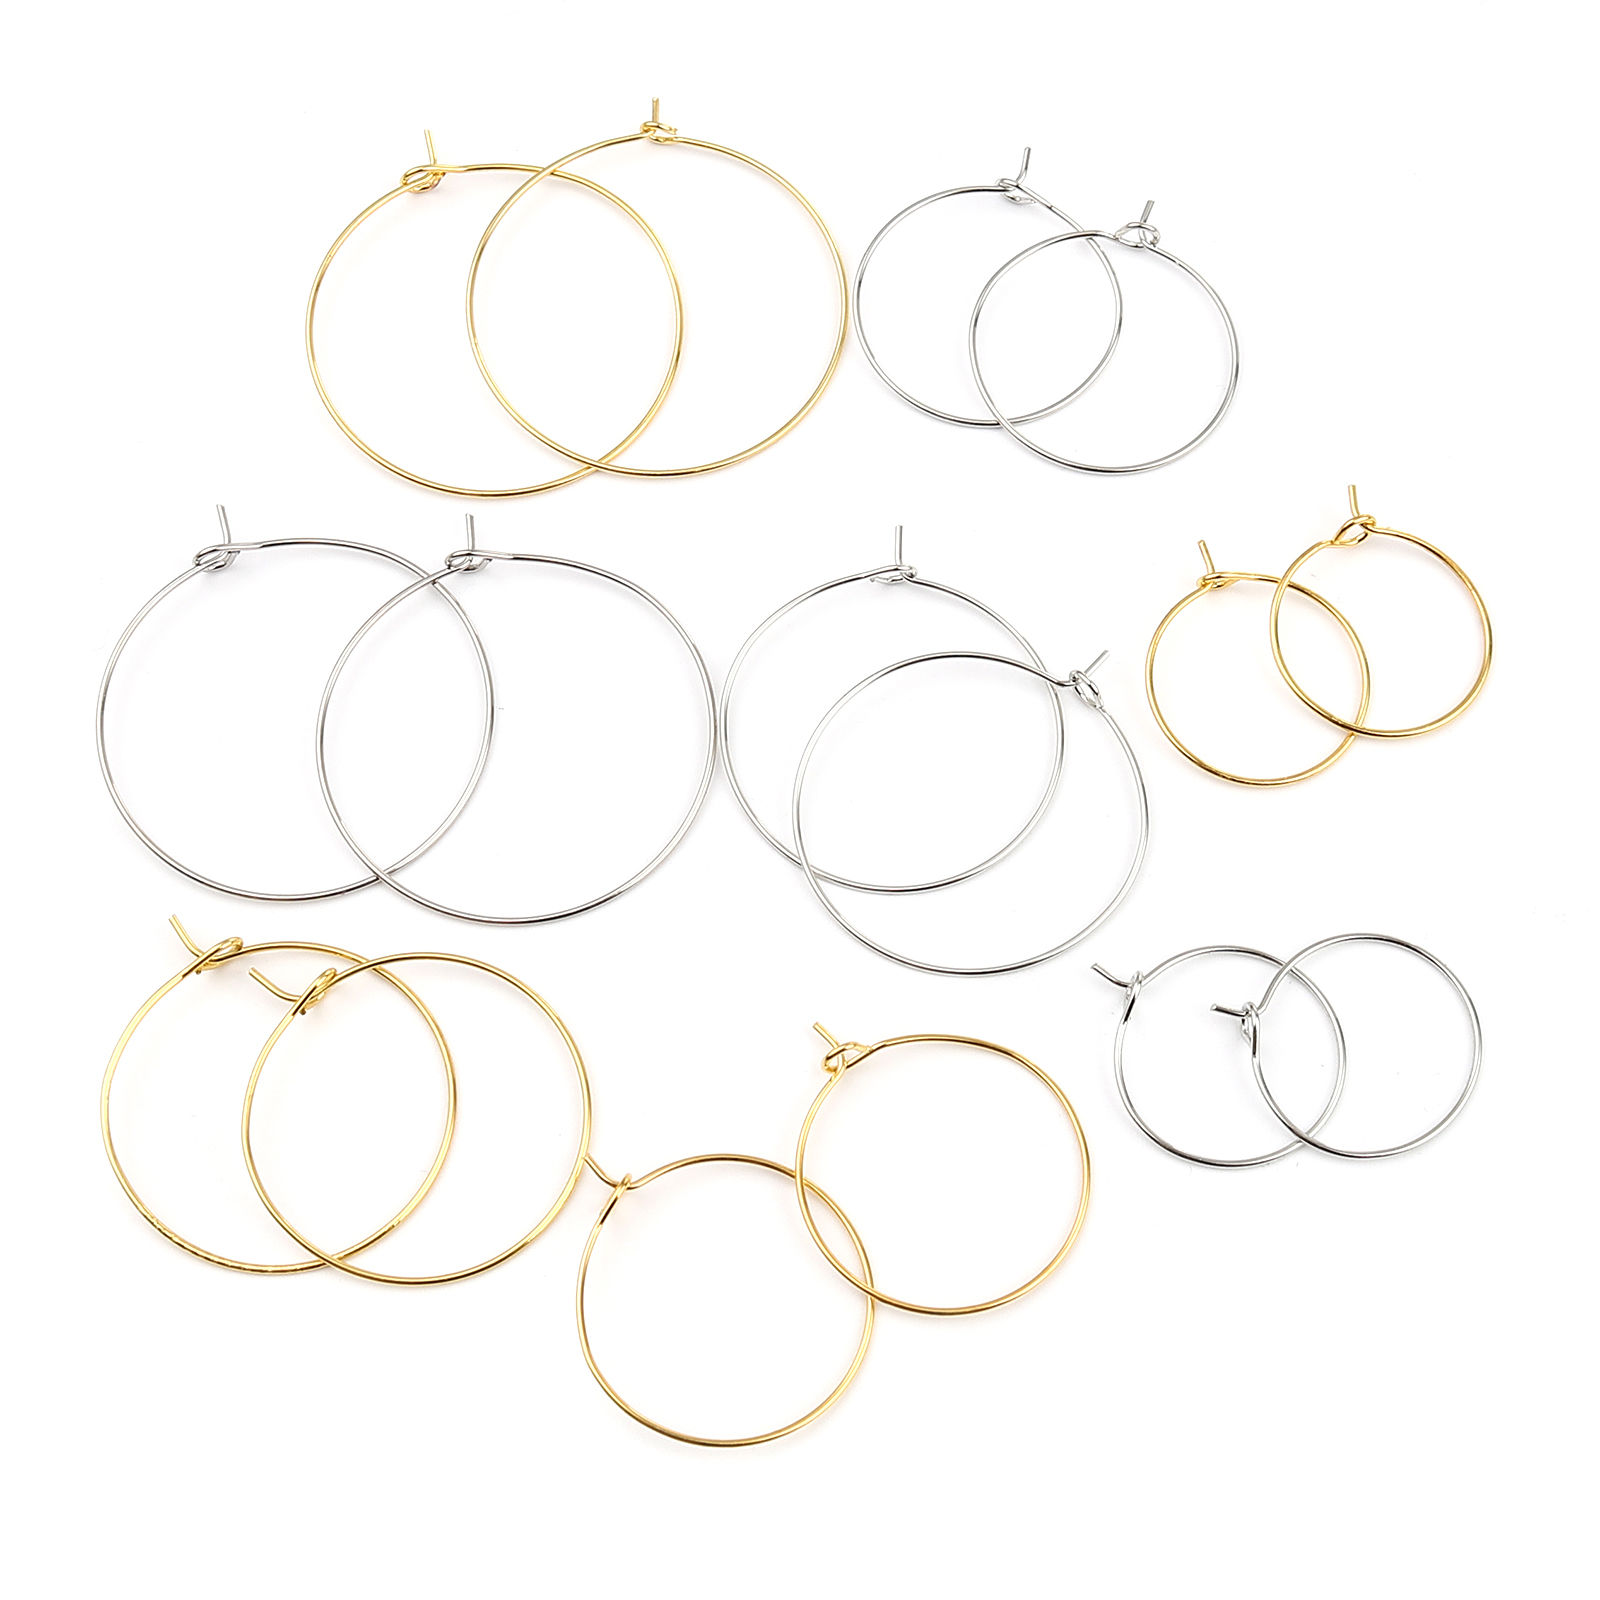 Iron Based Alloy Hoop Earrings Findings Circle Ring Silver Tone 38mm x 35mm, Post/ Wire Size: (21 gauge), 2000 PCs の画像